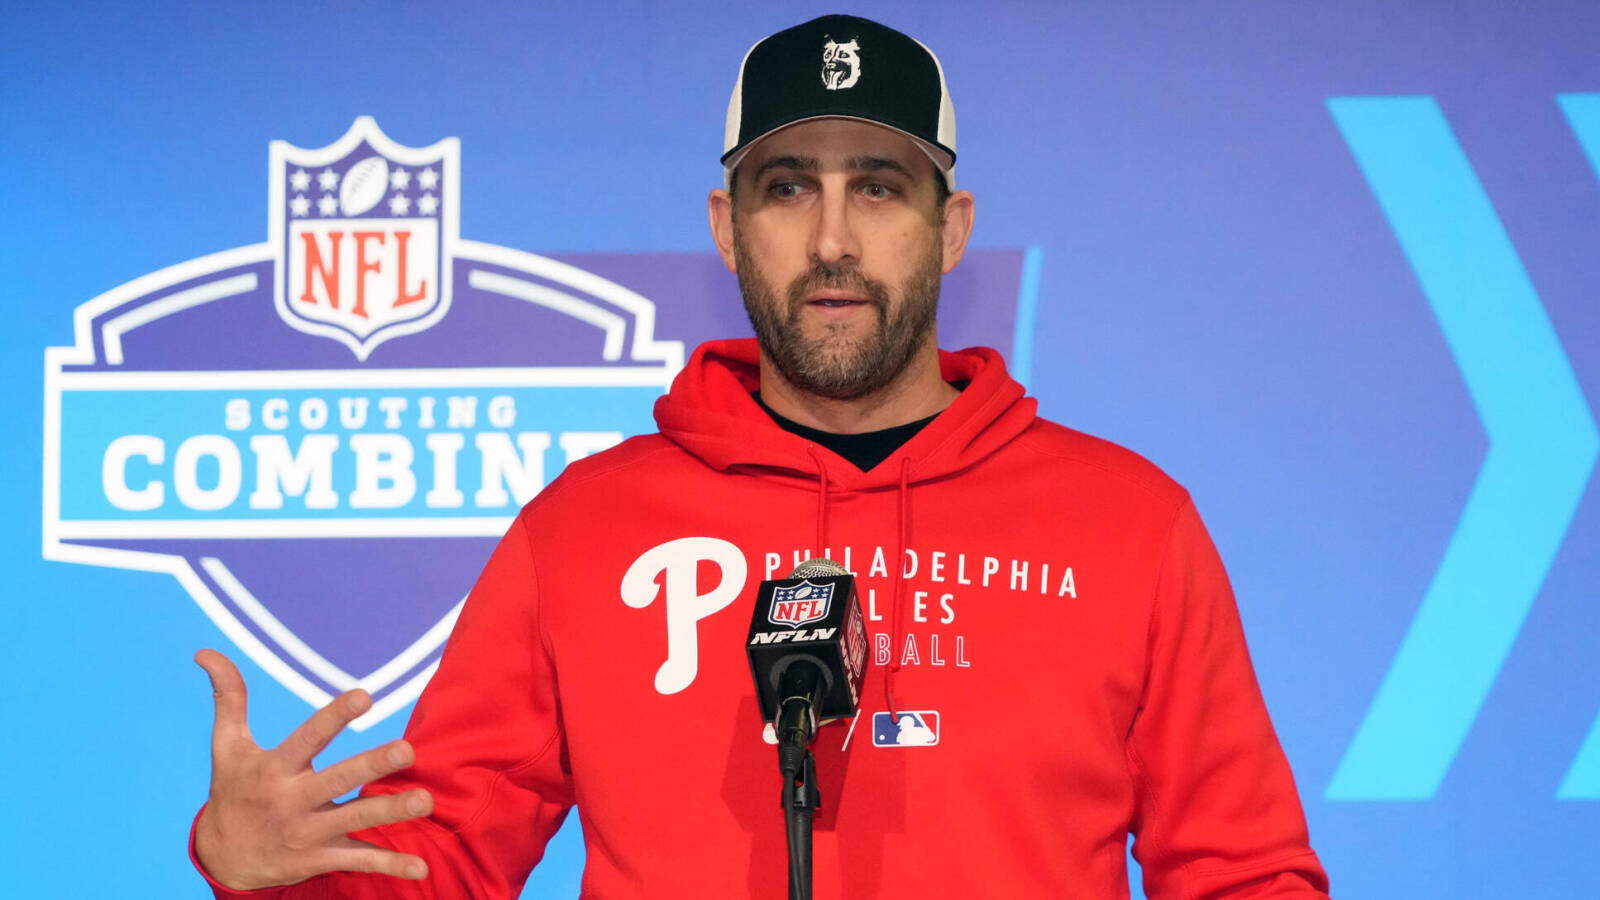 Eagles HC throws out first pitch for Phillies home opener